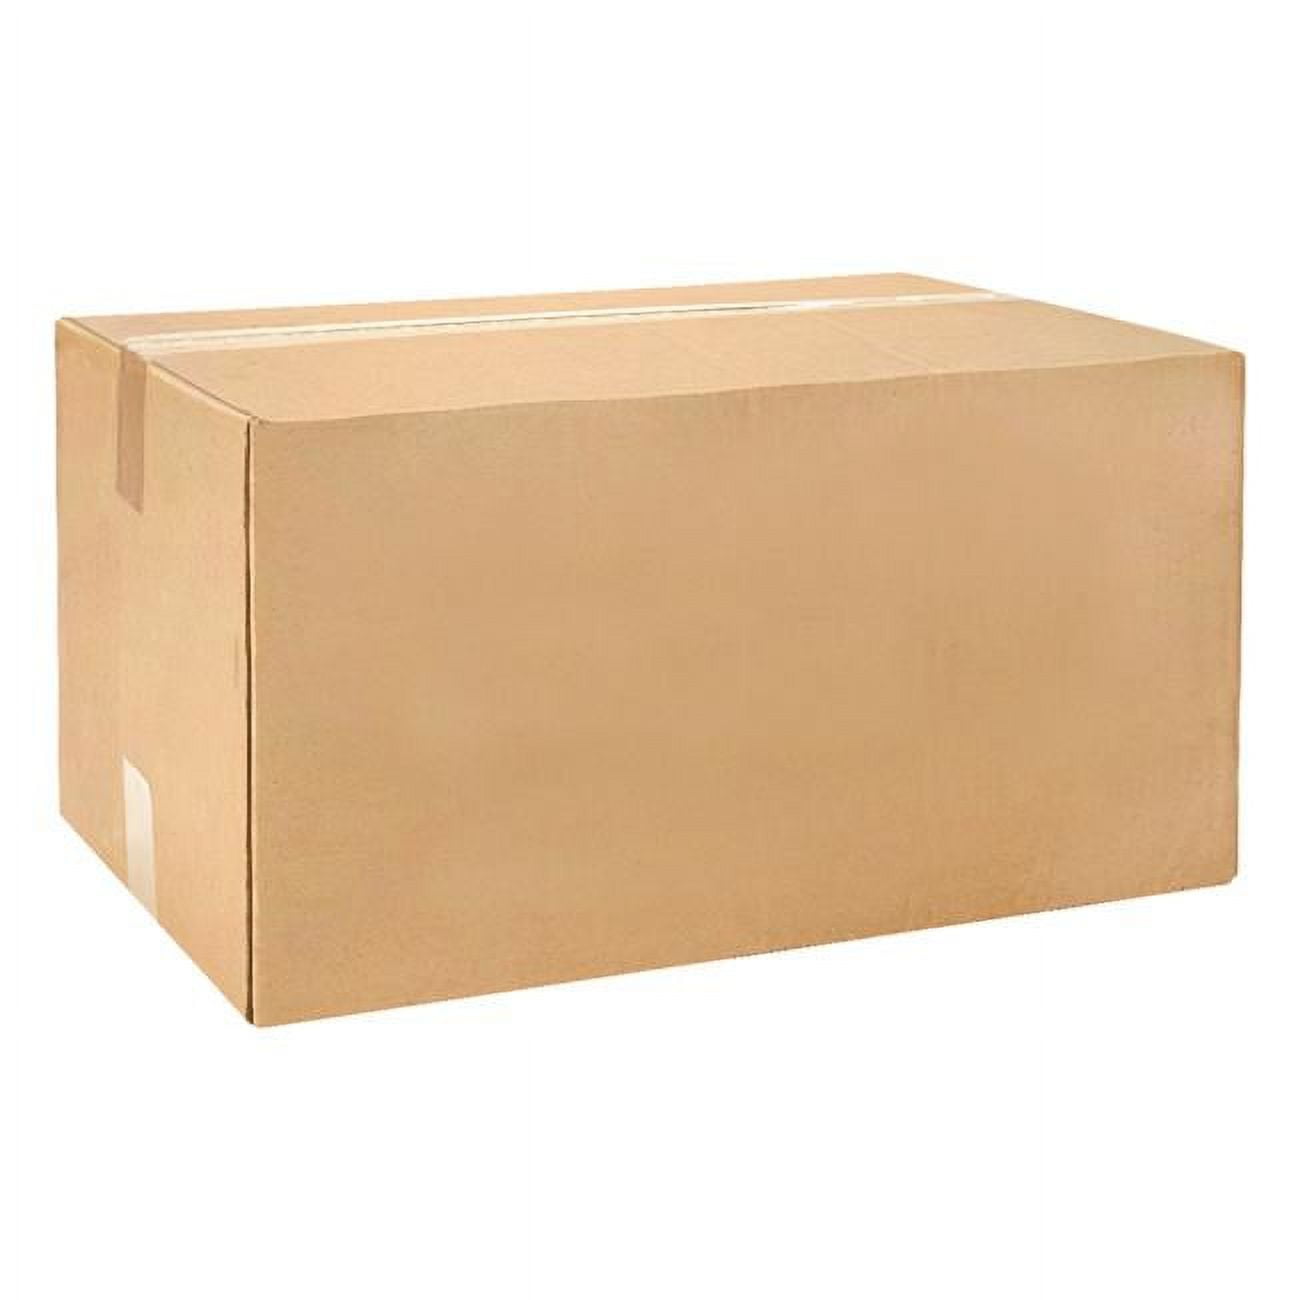 9330952 18 x 18 x 24 in. Cardboard Moving Box -  BOXES ON WHEELS